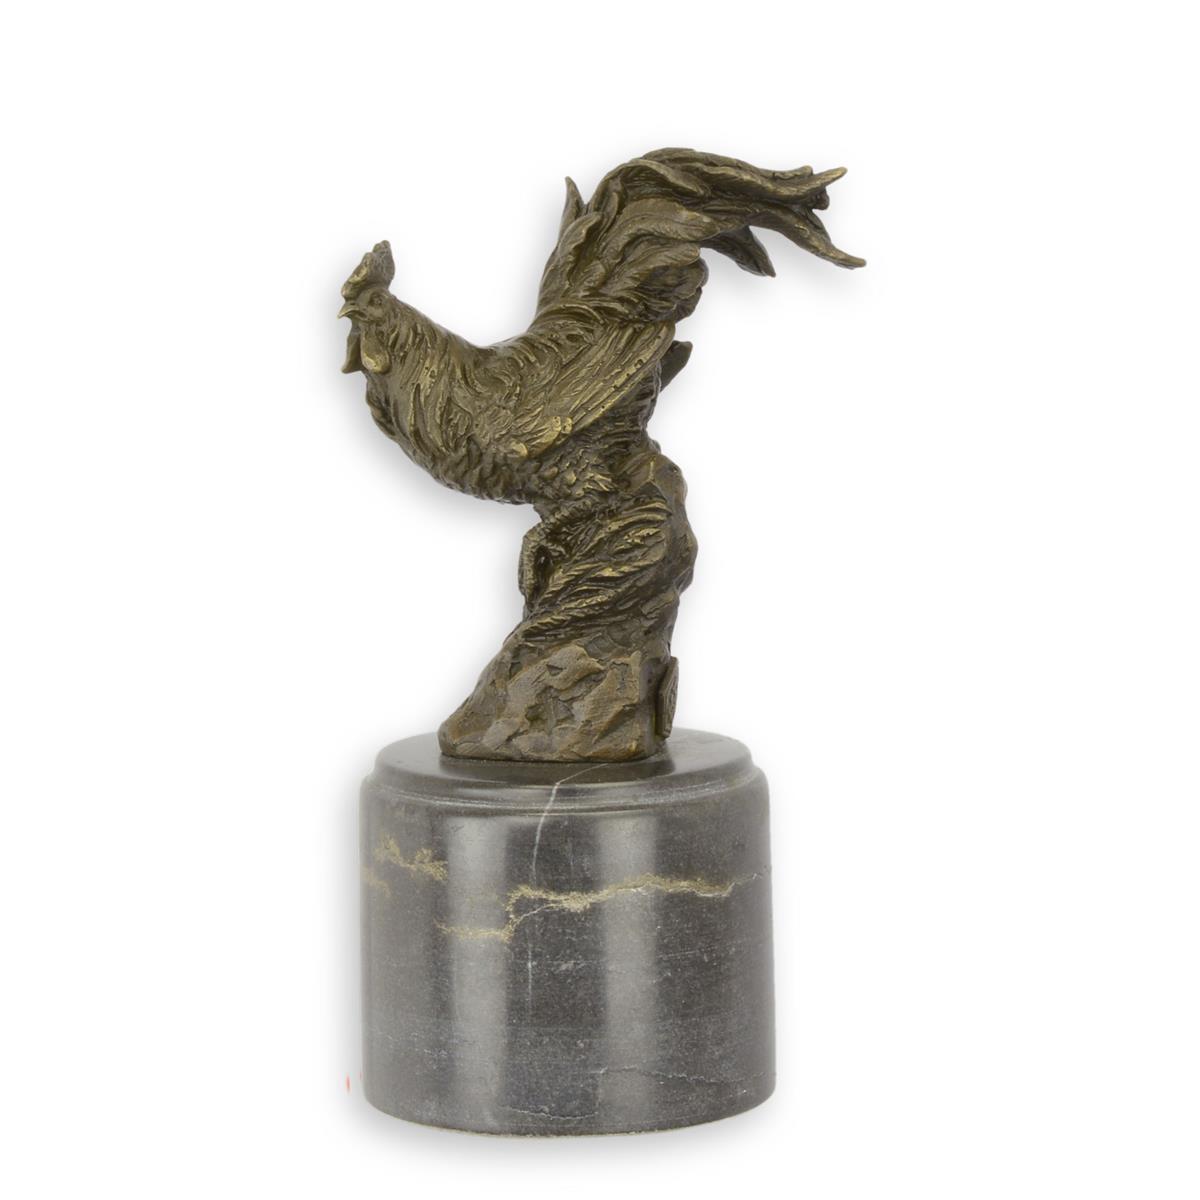 A BRONZE SCULPTURE OF A SMALL ROOSTER ON A BLACK MARBLE BASE